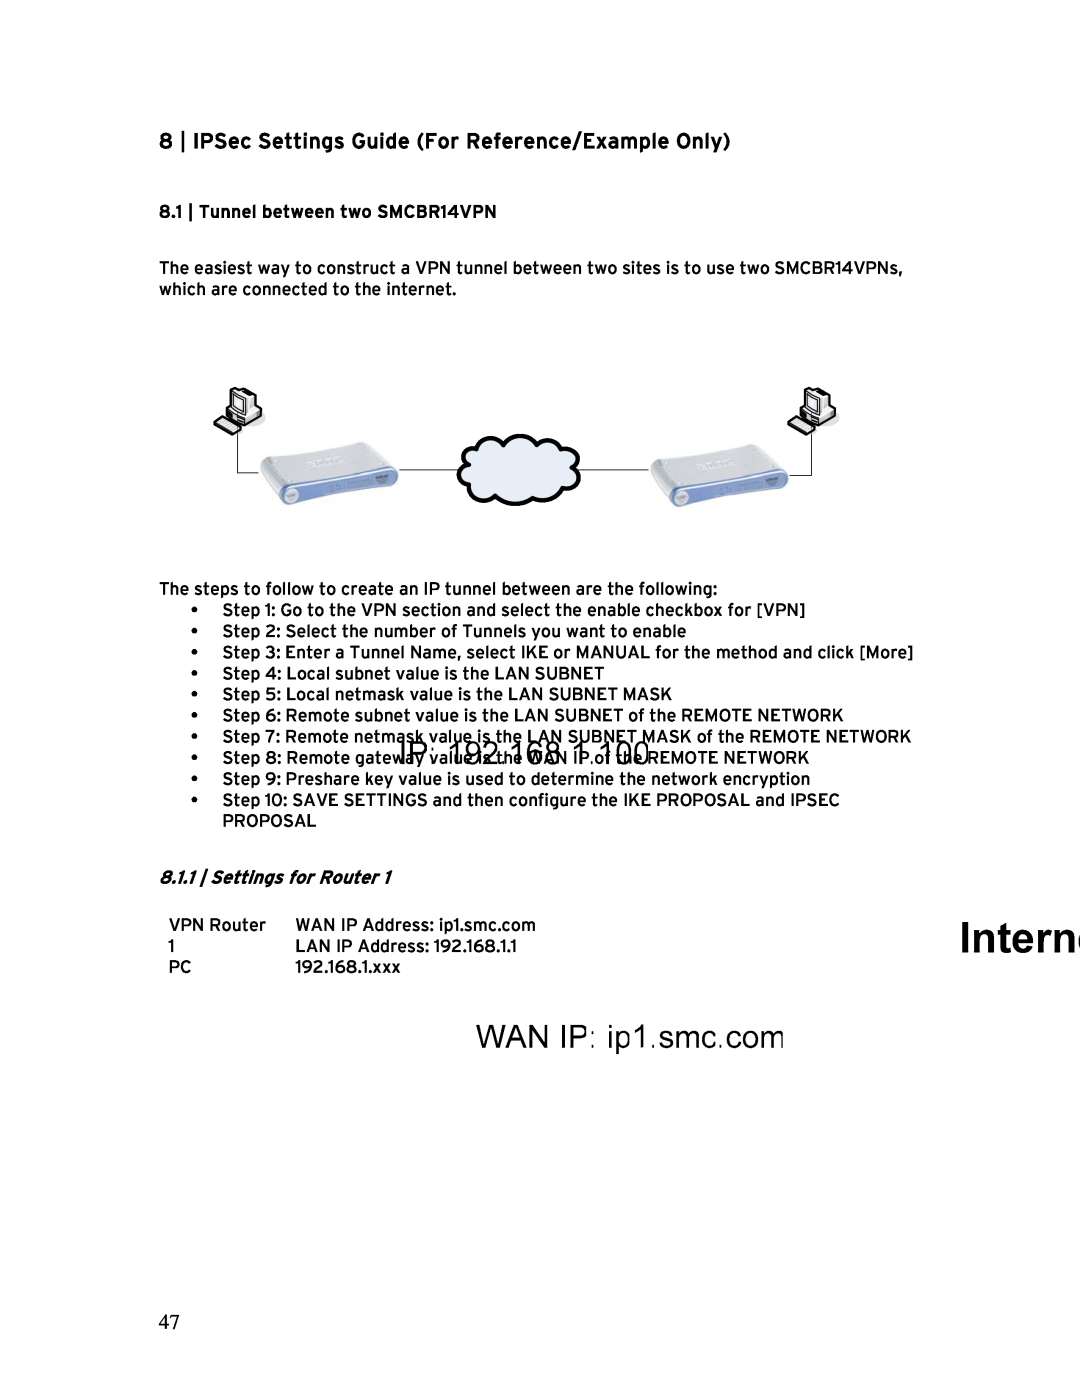 SMC Networks manual IPSec Settings Guide For Reference/Example Only, Settings for Router, Tunnel between two SMCBR14VPN 